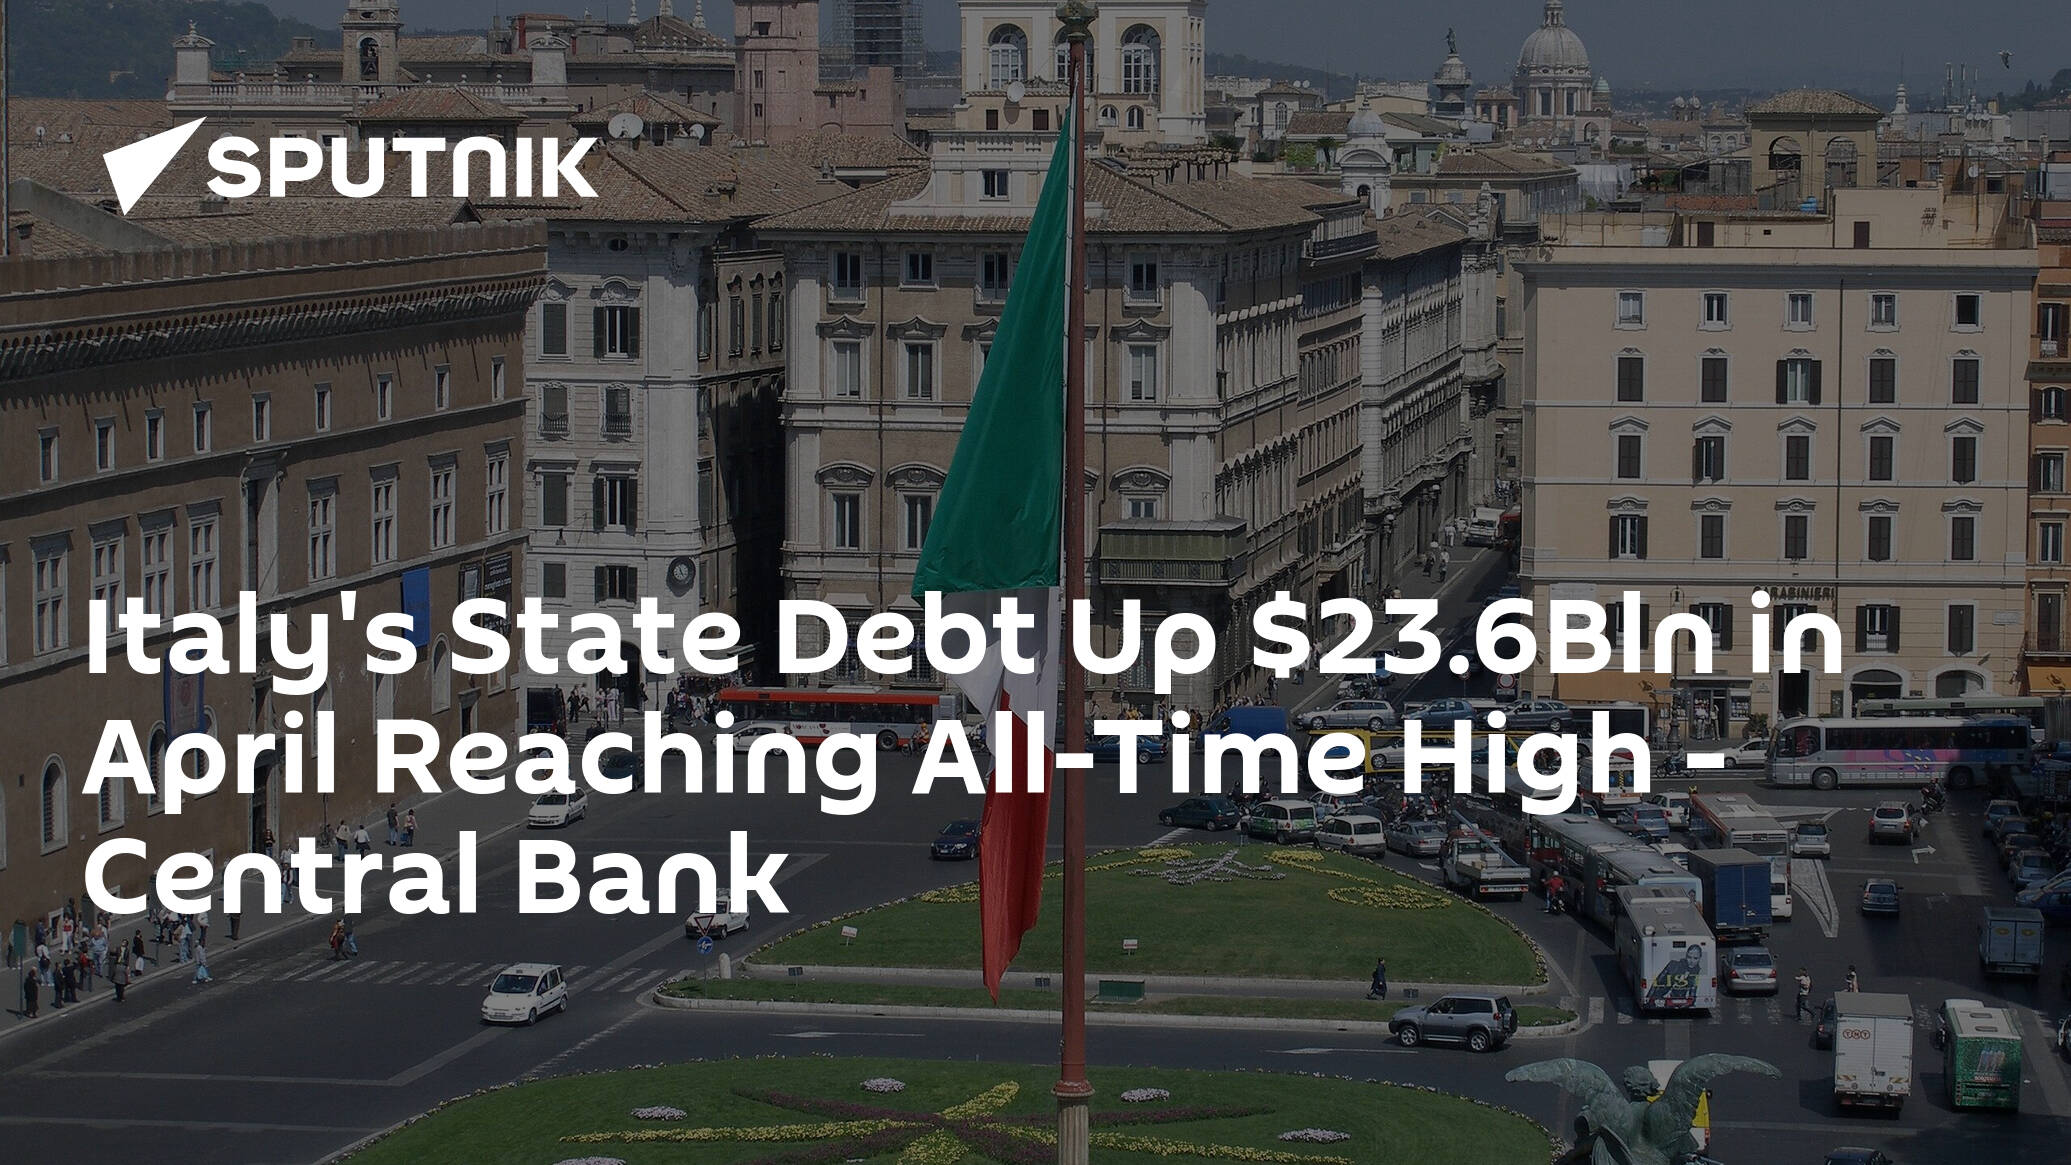 Italy's State Debt Up .6Bln in April Reaching All-Time High – Central Bank